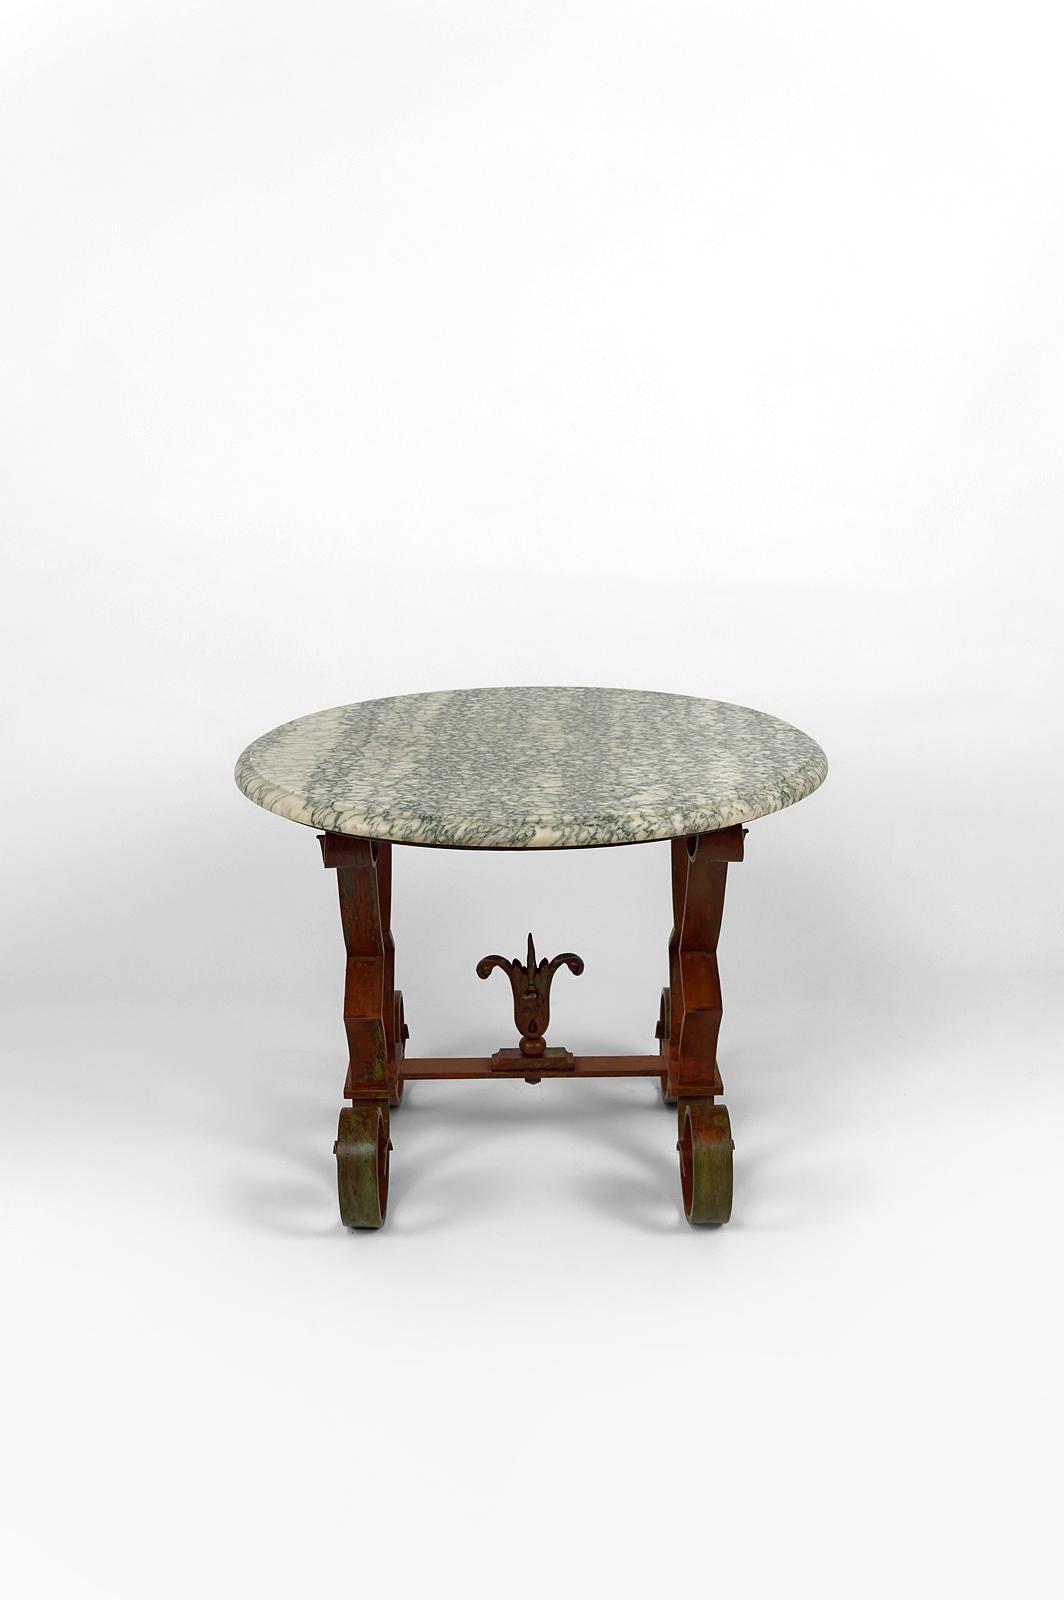 French Circular Art Deco Pedestal Table in Marble and Wrought Iron, France, circa 1940 For Sale